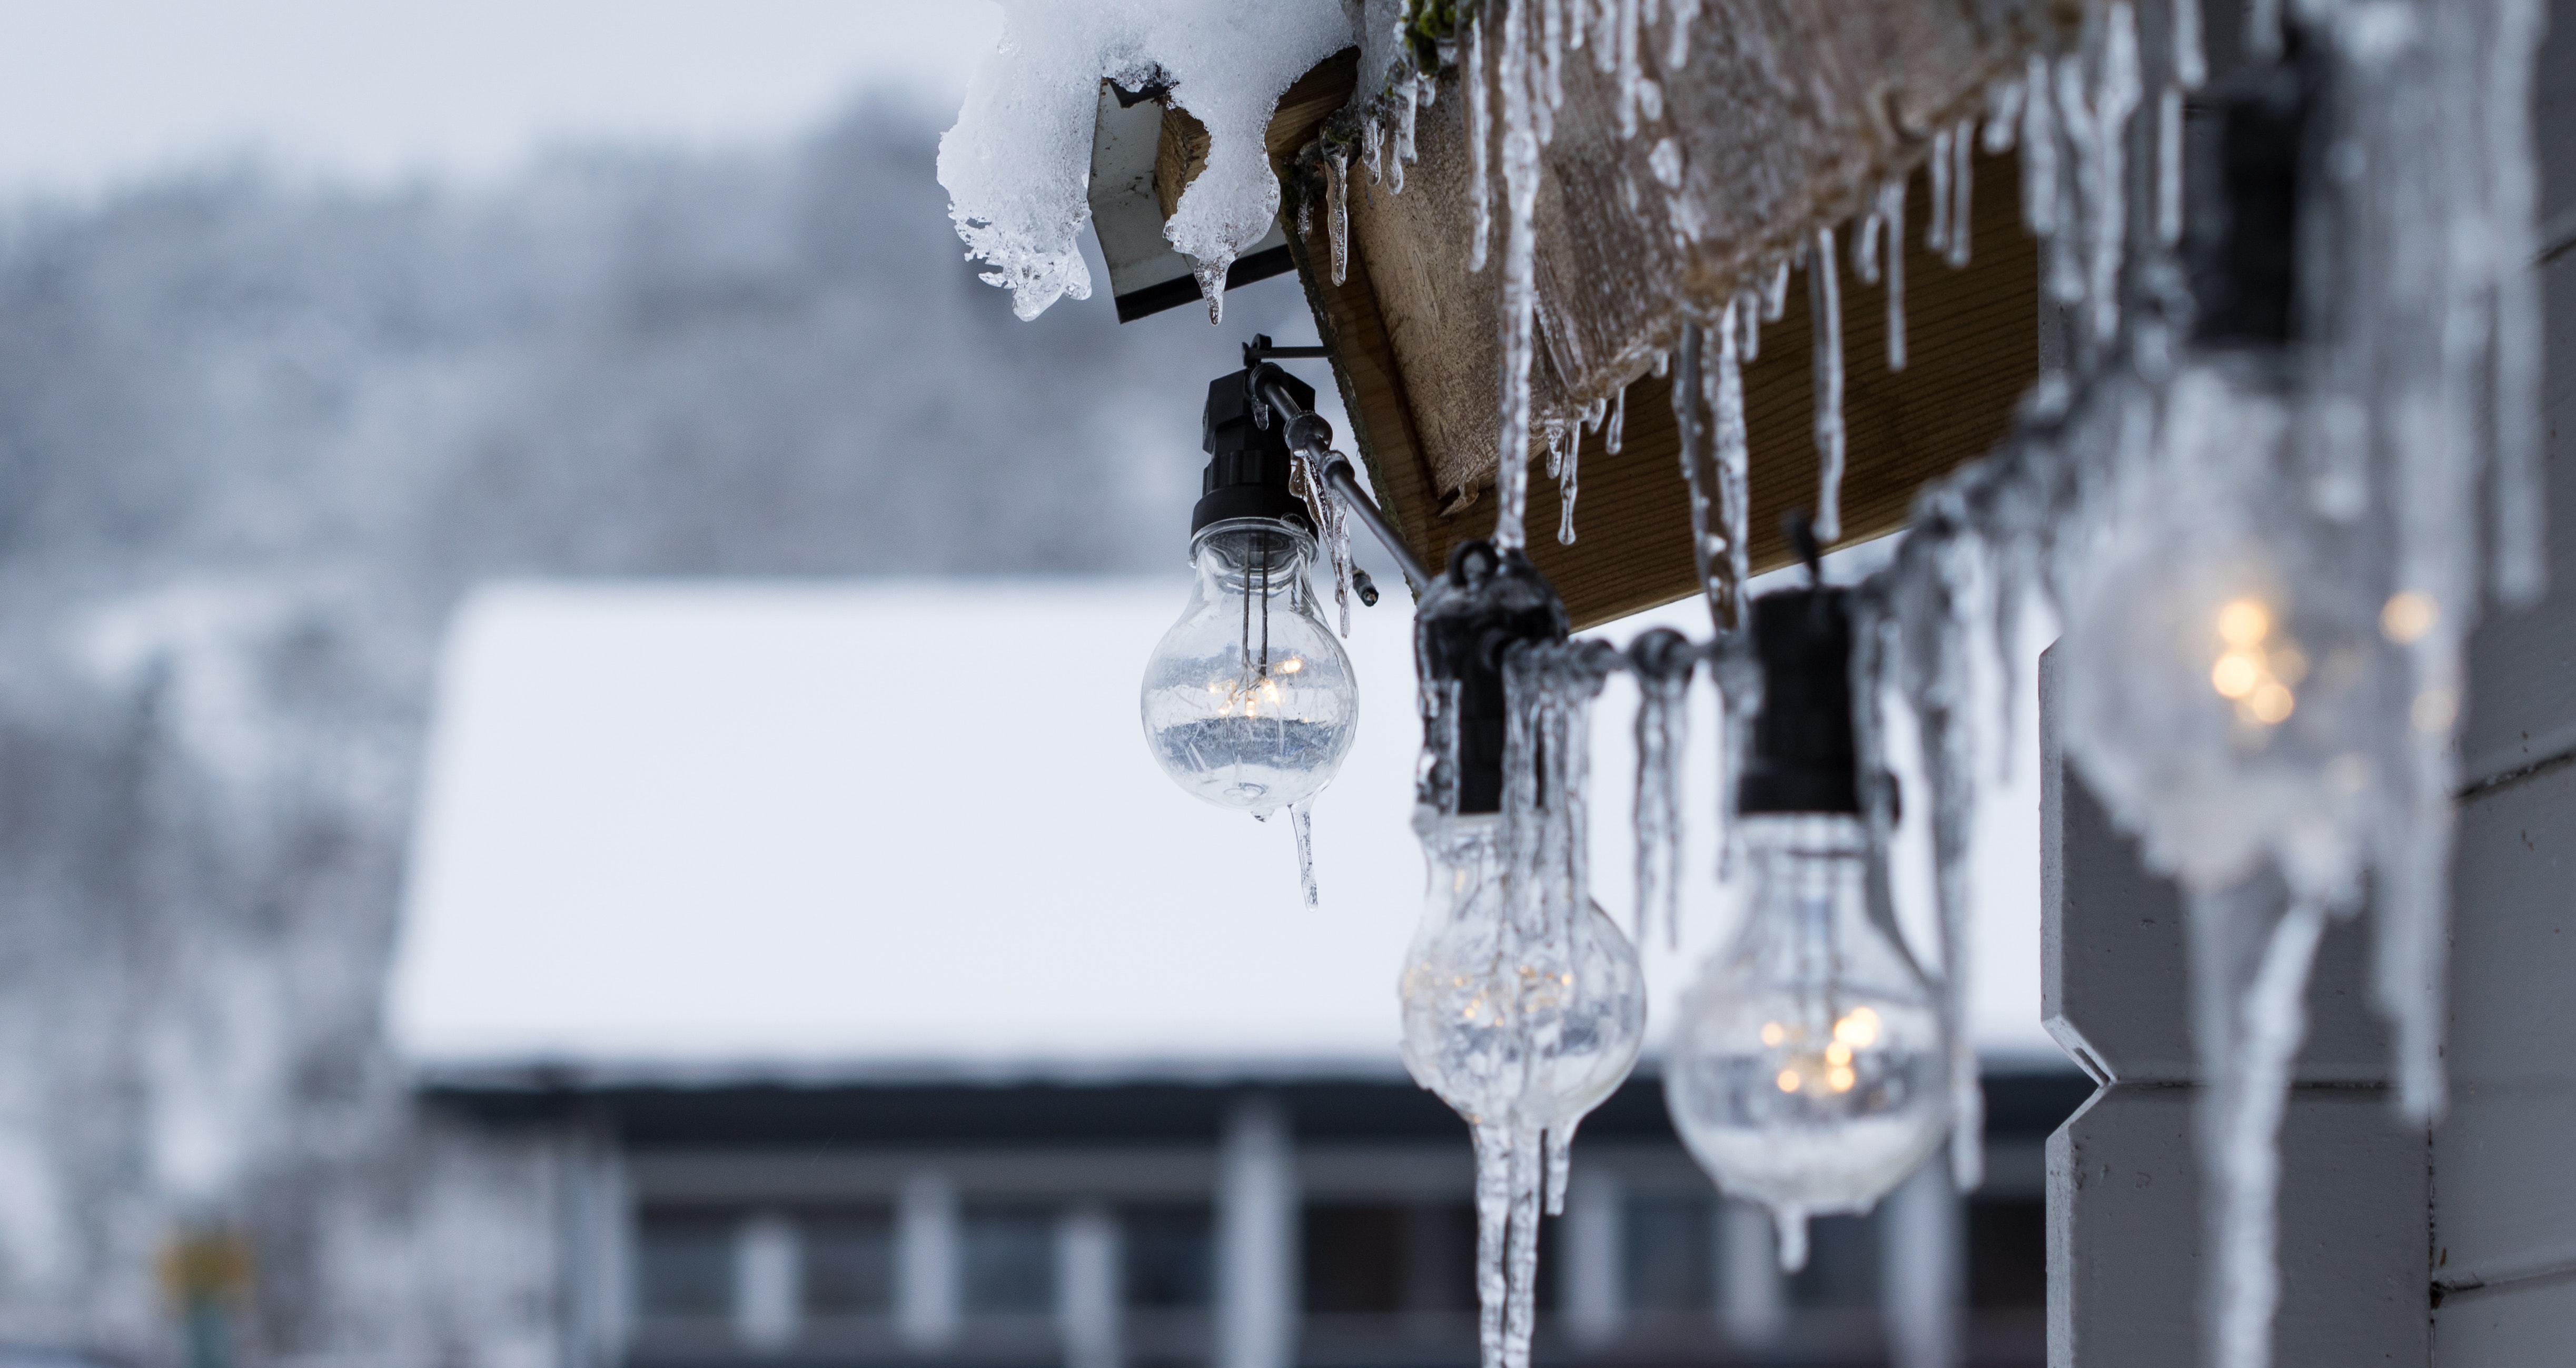 https://www.singhhomes.com/wp-content/uploads/2018/12/How-to-Keep-Snow-and-Ice-from-Damaging-Your-Home-blur-blurred-background-bulbs-818760.jpg